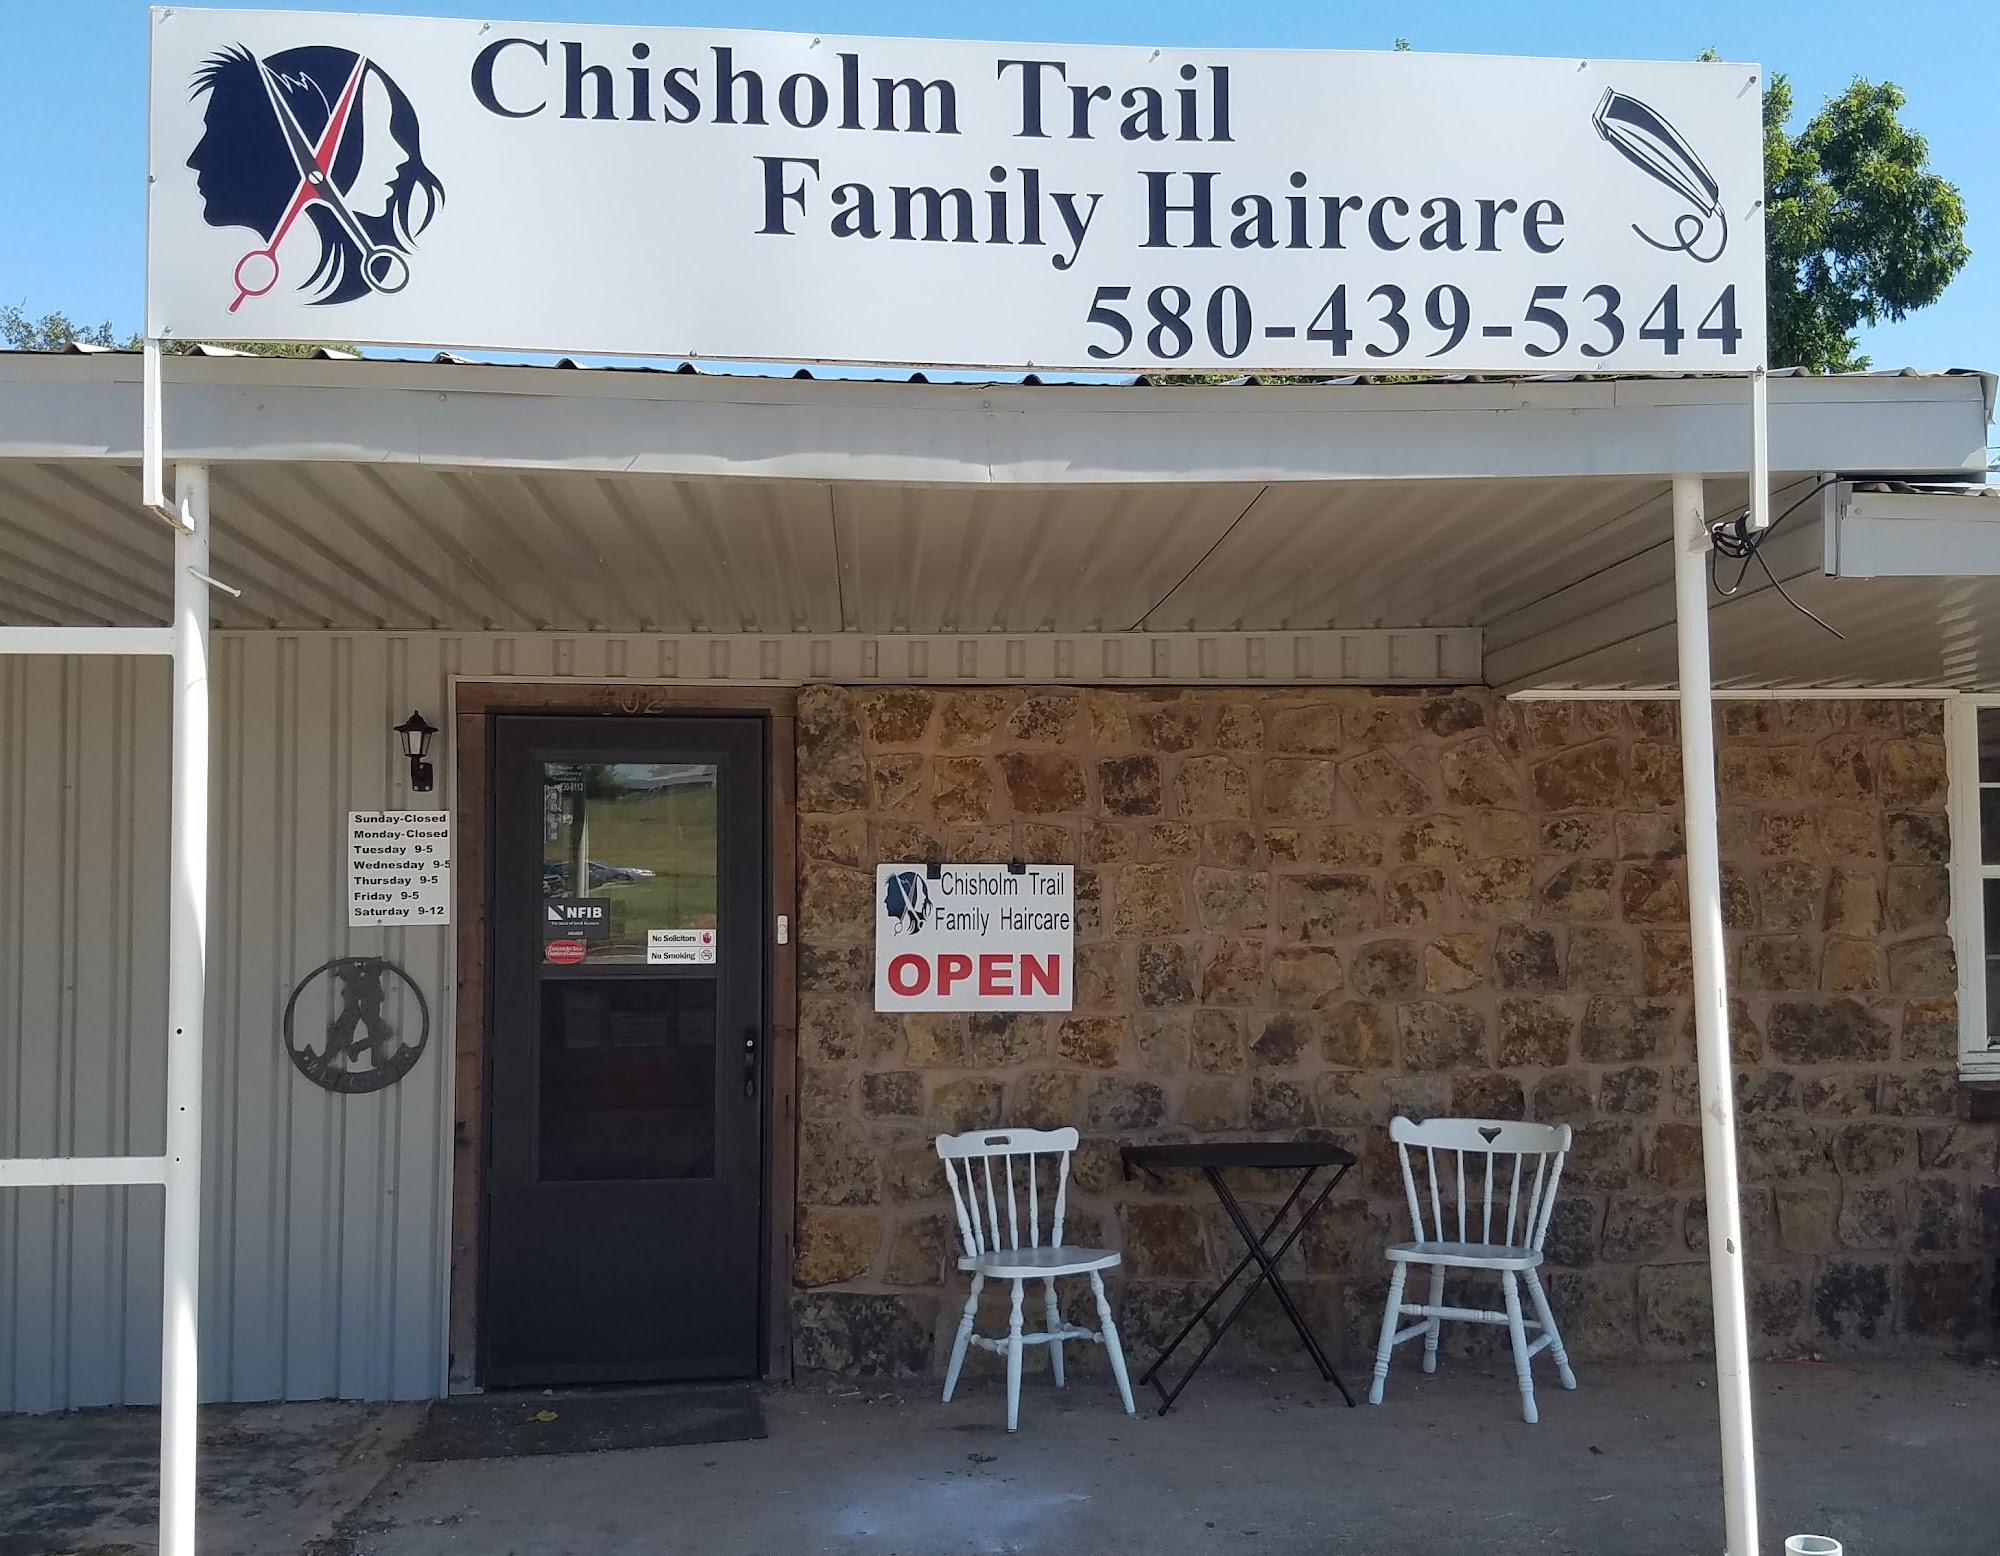 Chisholm Trail Family Haircare 402 S Rodeo Dr, Comanche Oklahoma 73529